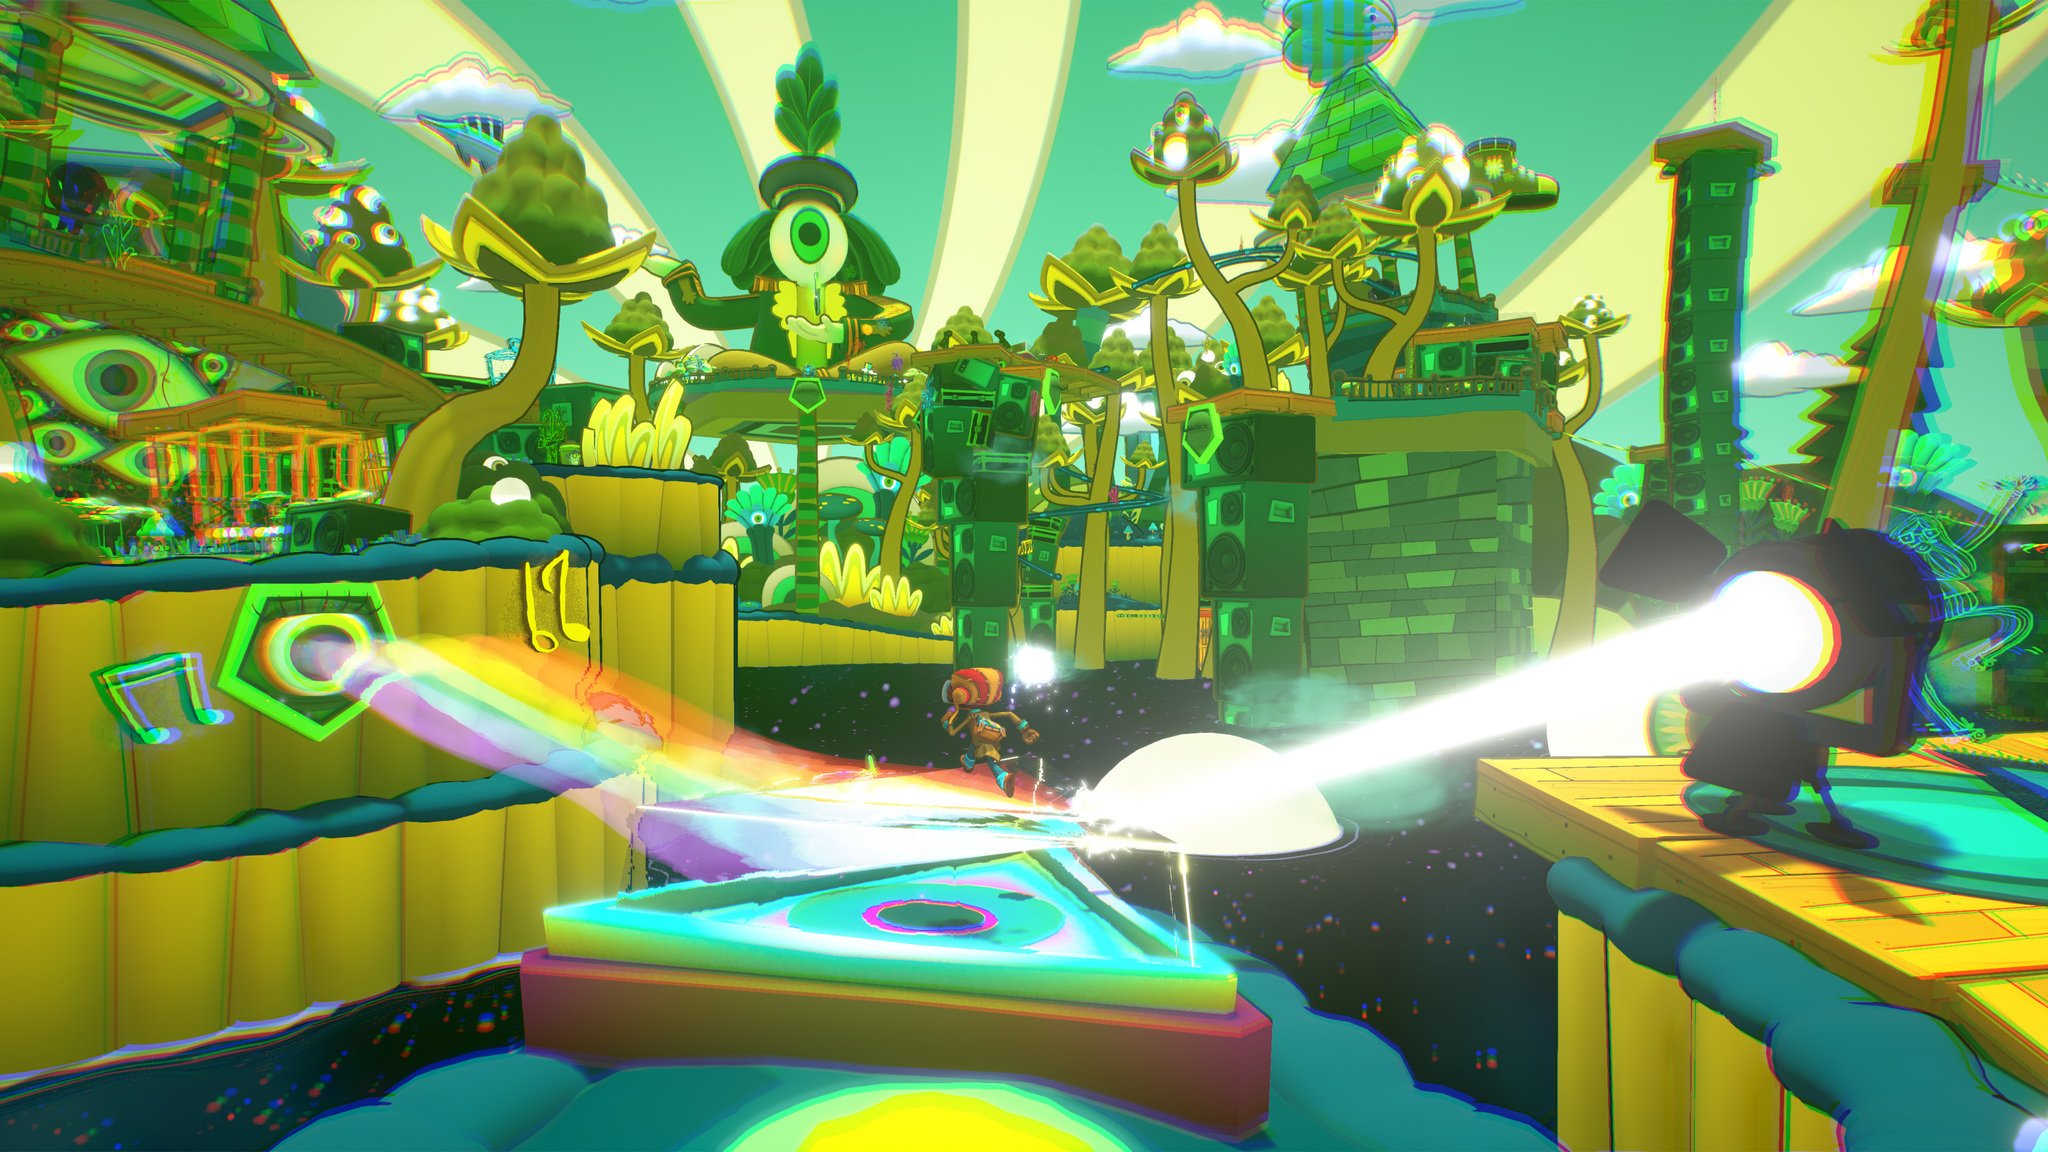 In Psychonauts 2, you'll trip through a psychedelic rock n' roll landscape to help a disembodied mind reunite with his senses.